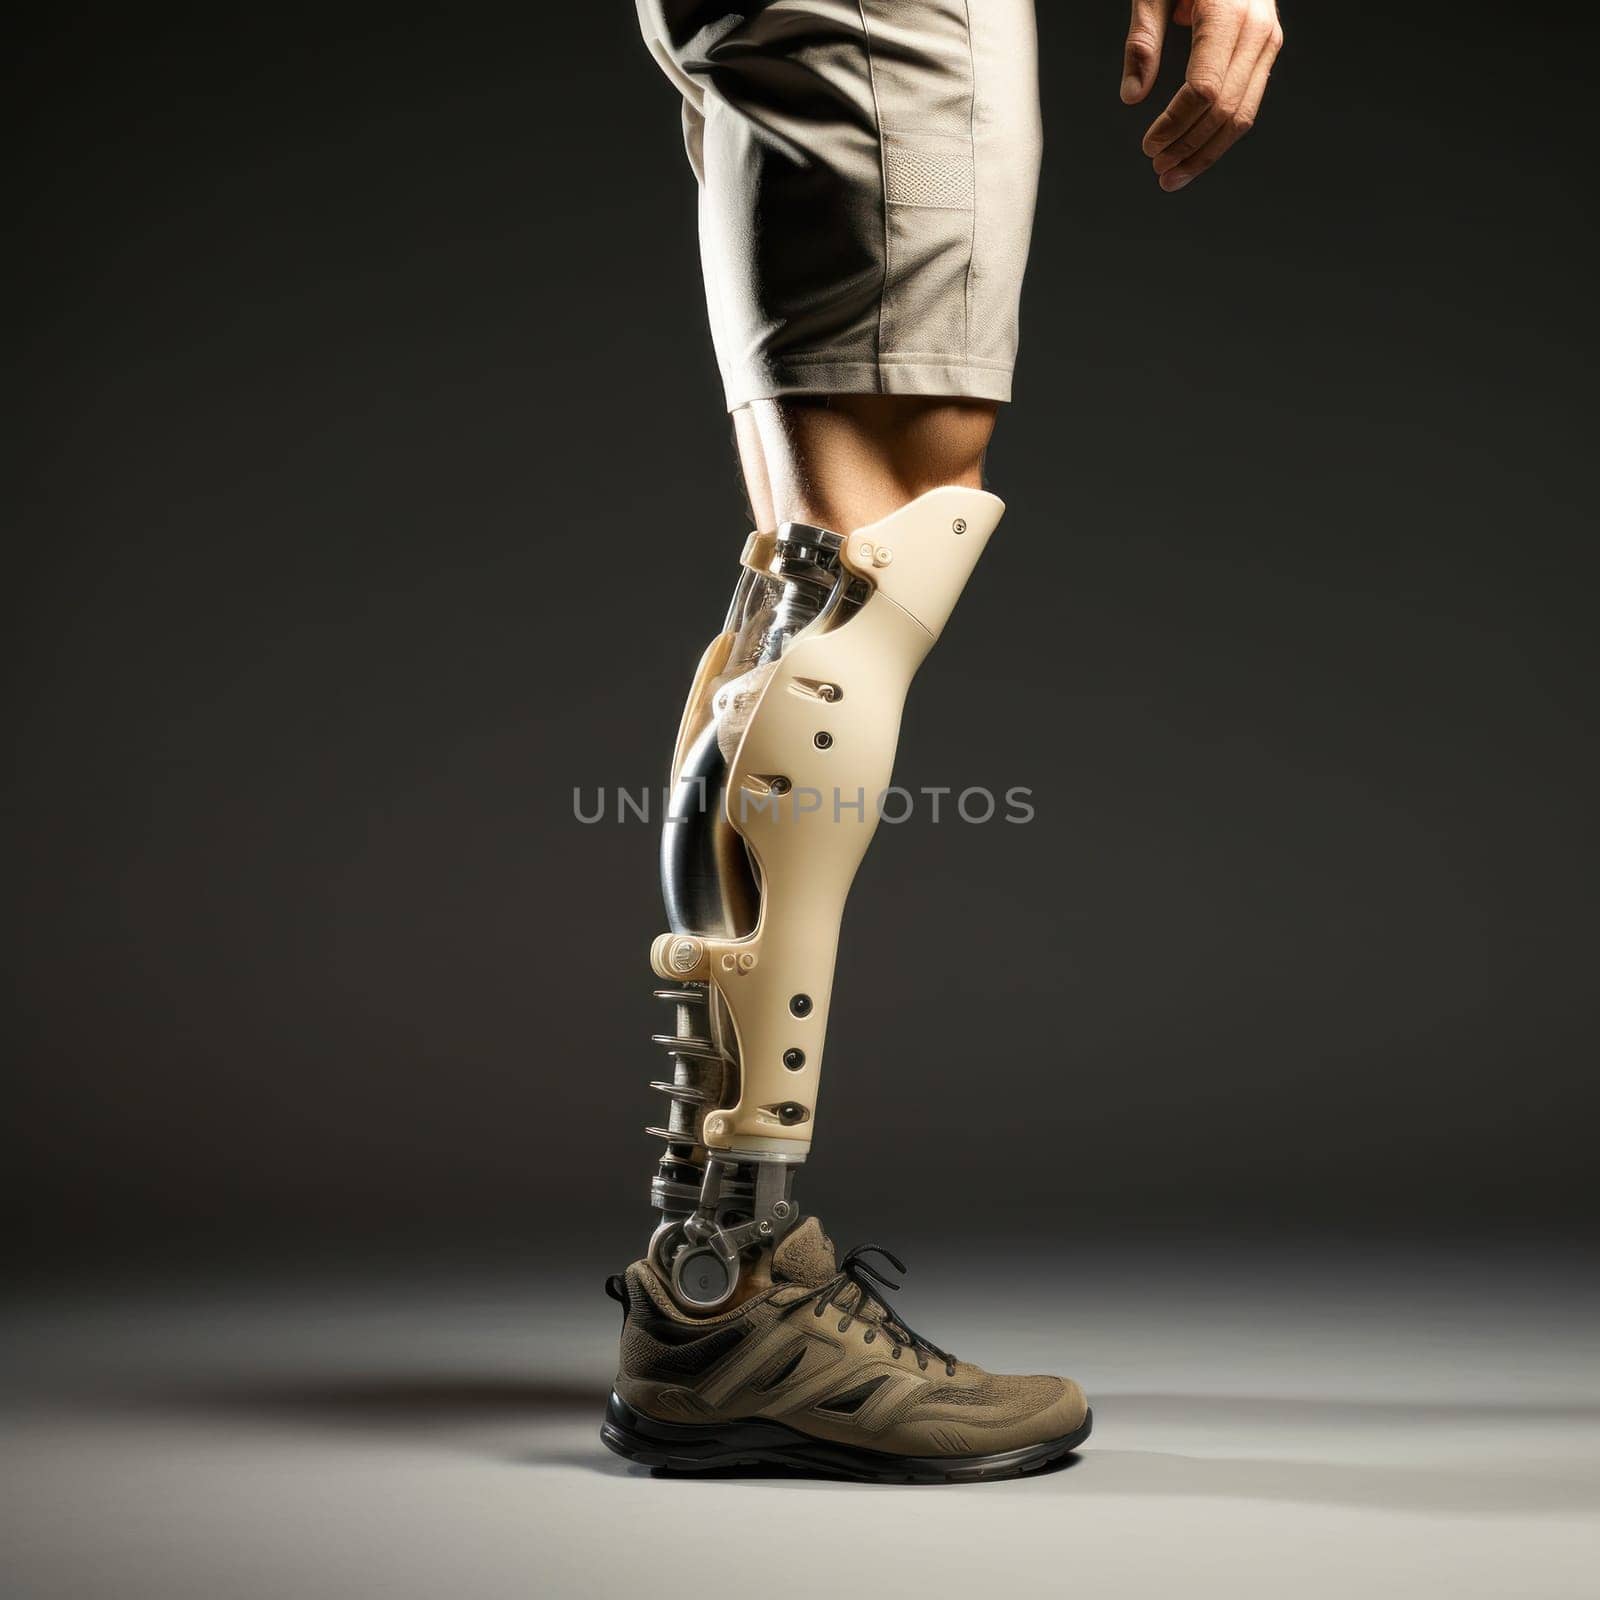 Bionic Adaptation: A Man Empowering Himself with Prosthetic Legs by Yurich32